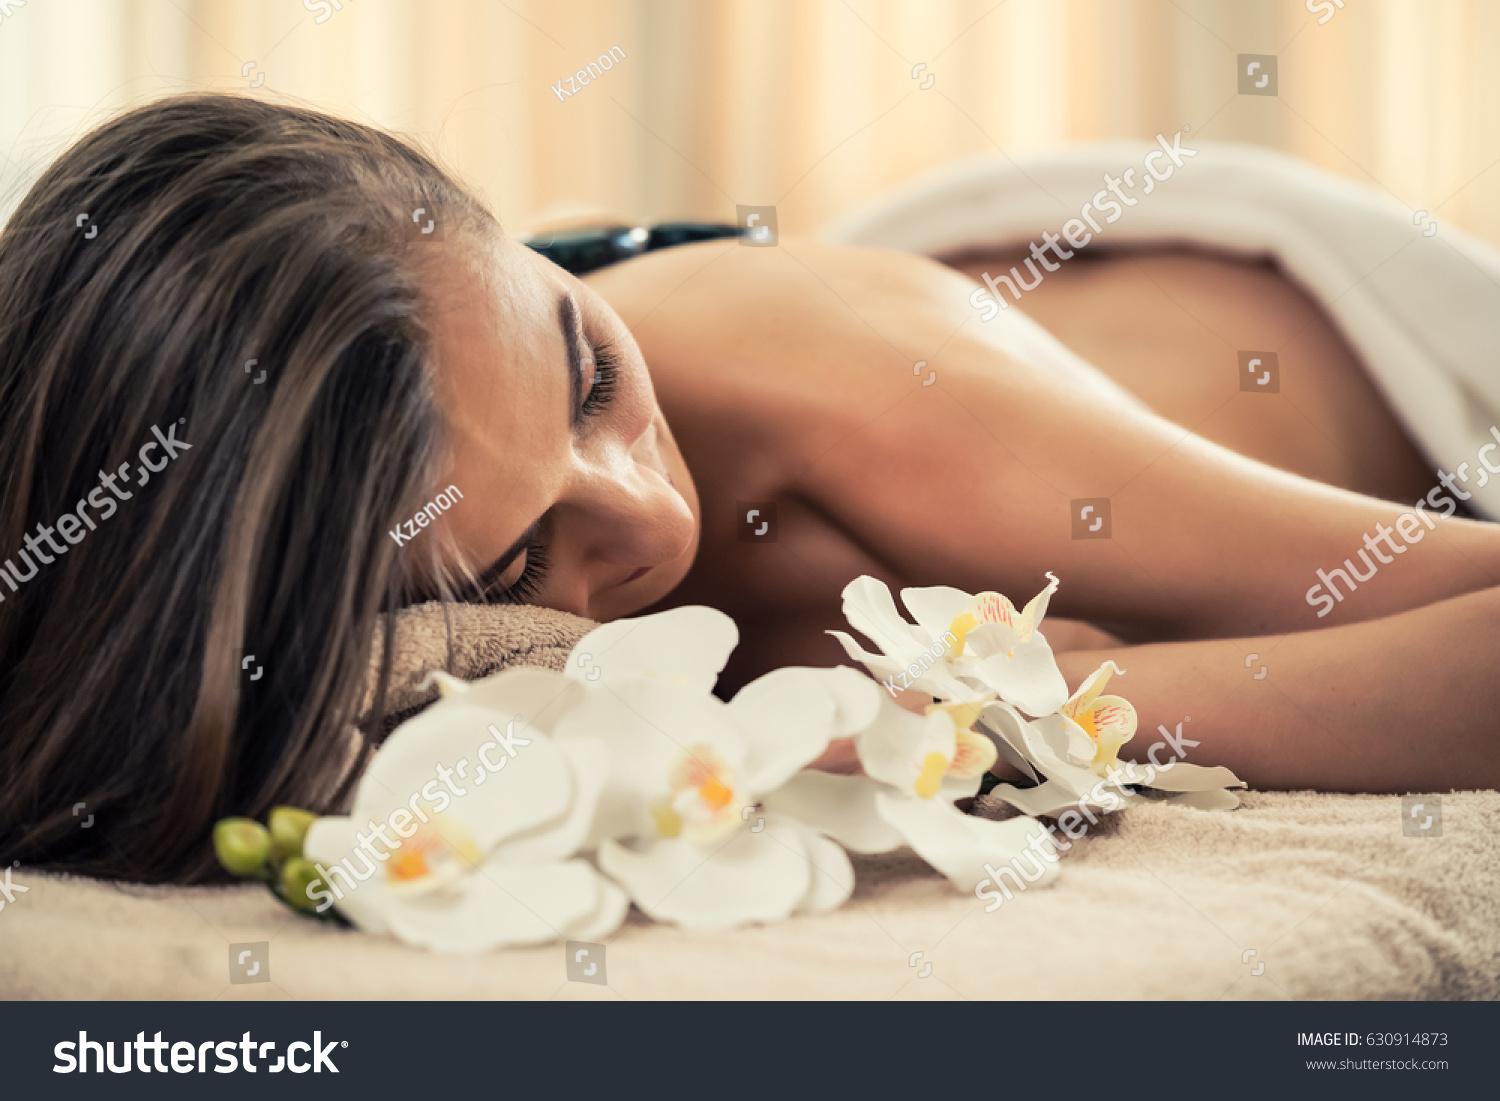 High angle view of young woman lying down on massage bed with traditional hot stones along the spine at spa and wellness center  #630914873